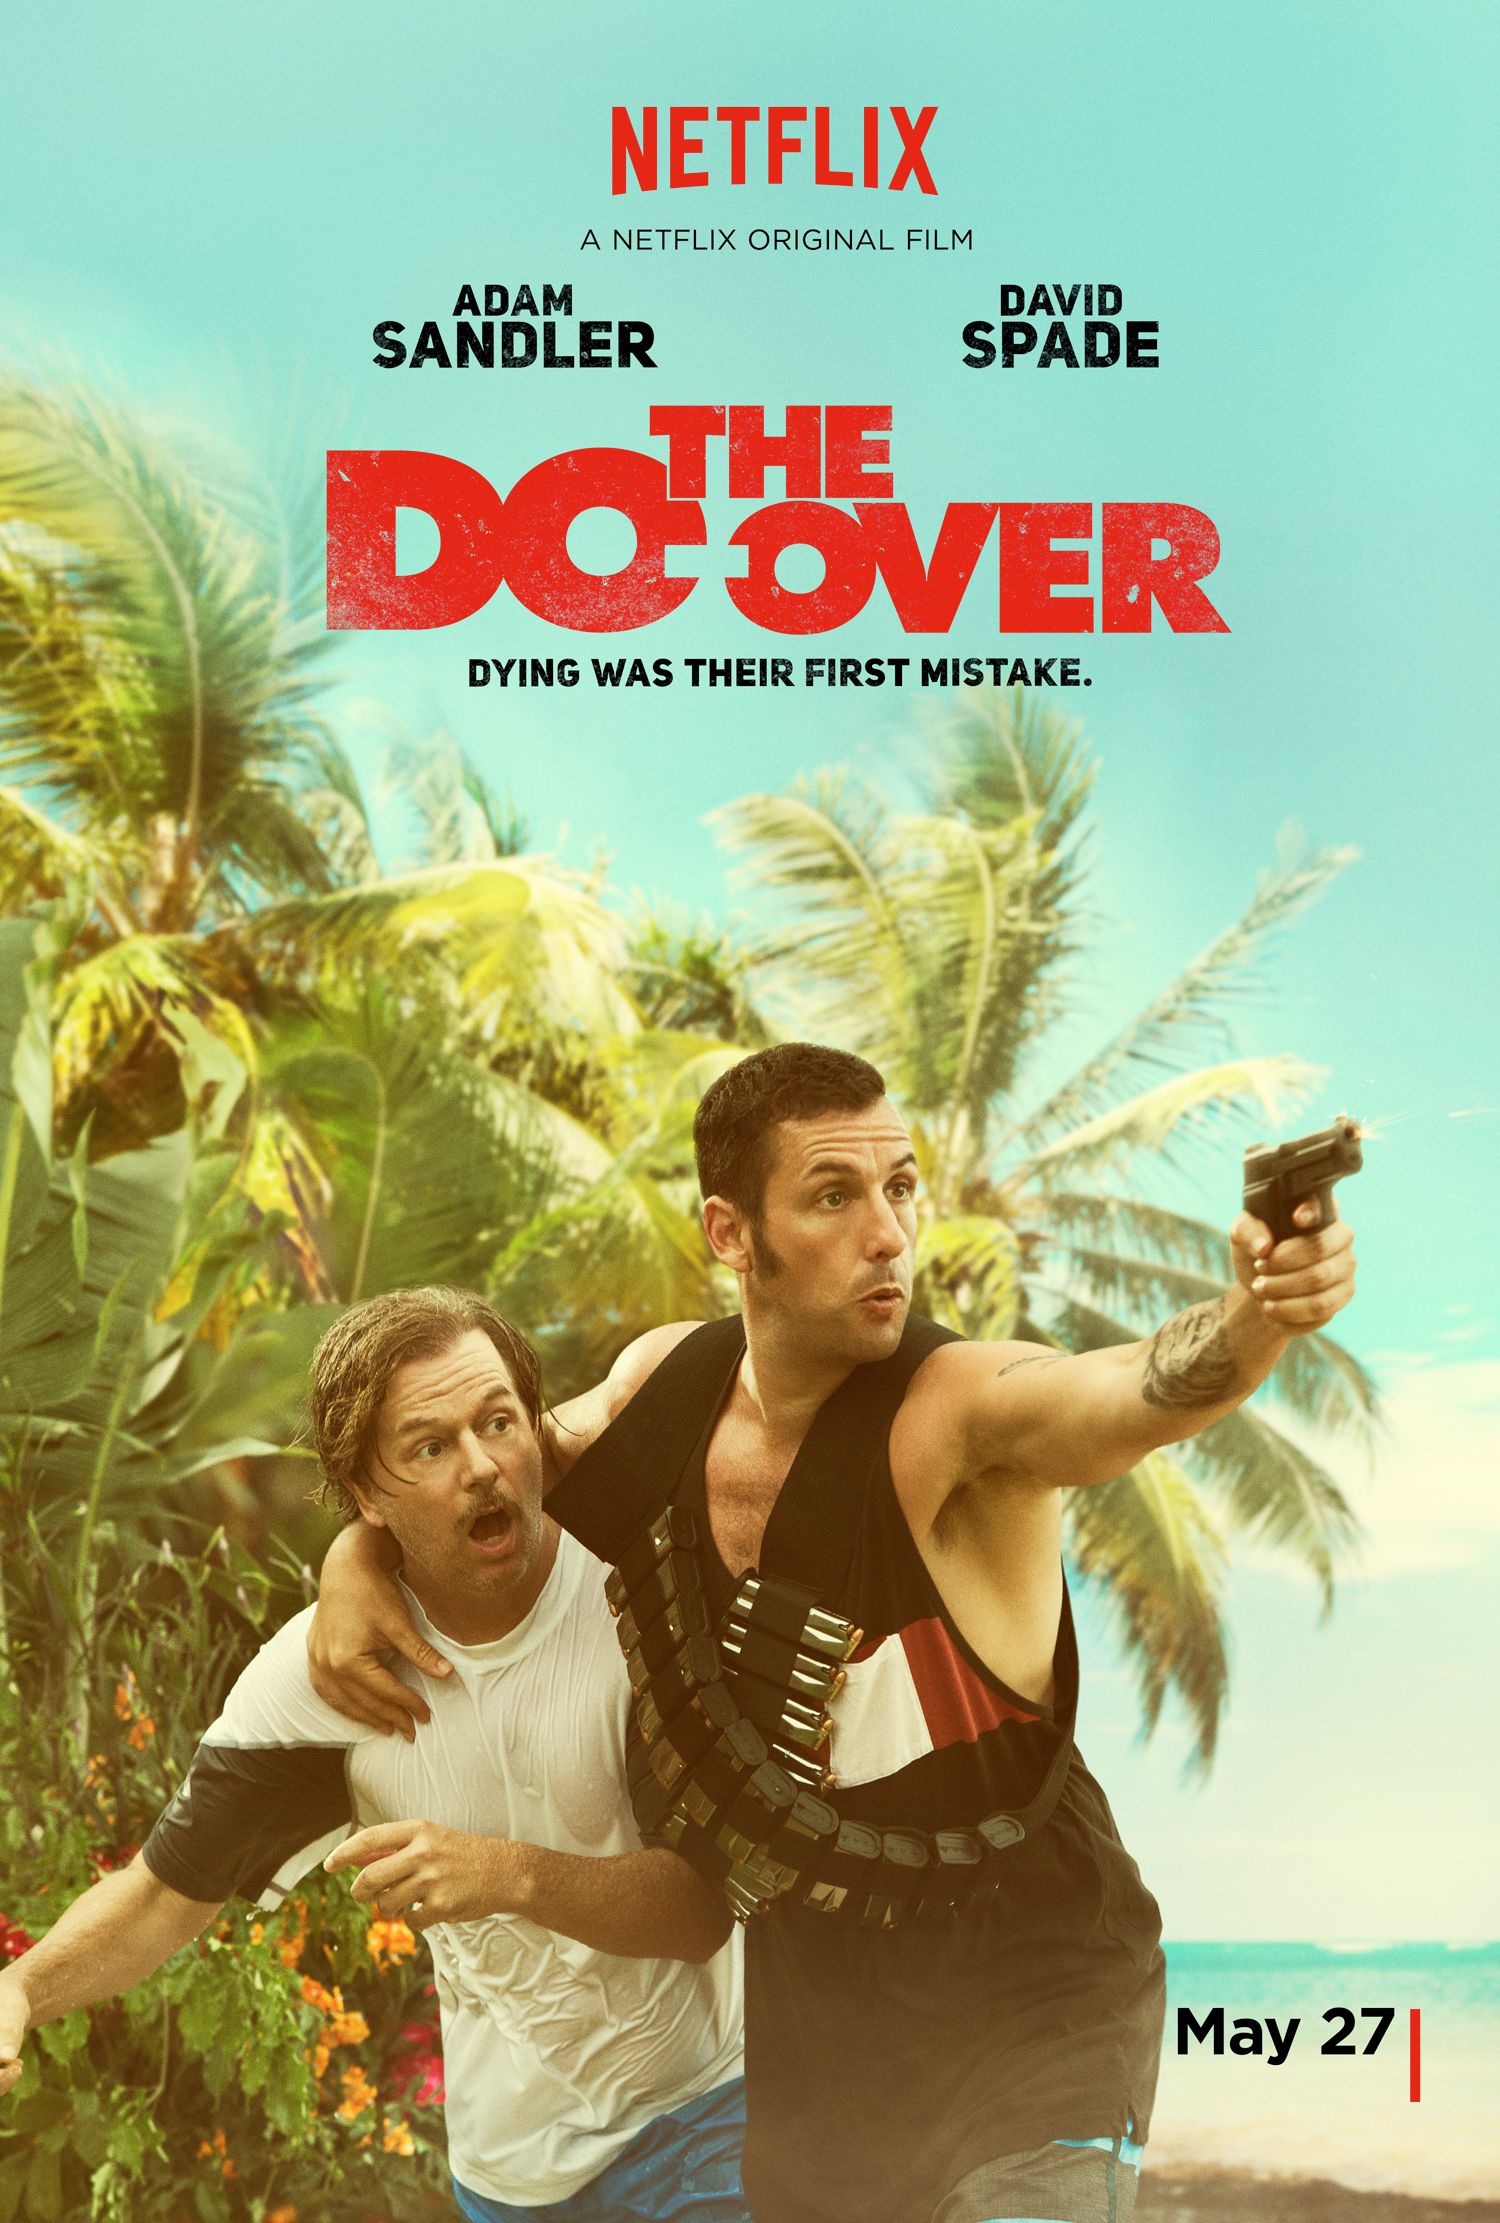 The Do-over Trailer For Adam Sandlers Nsfw Netflix Movie